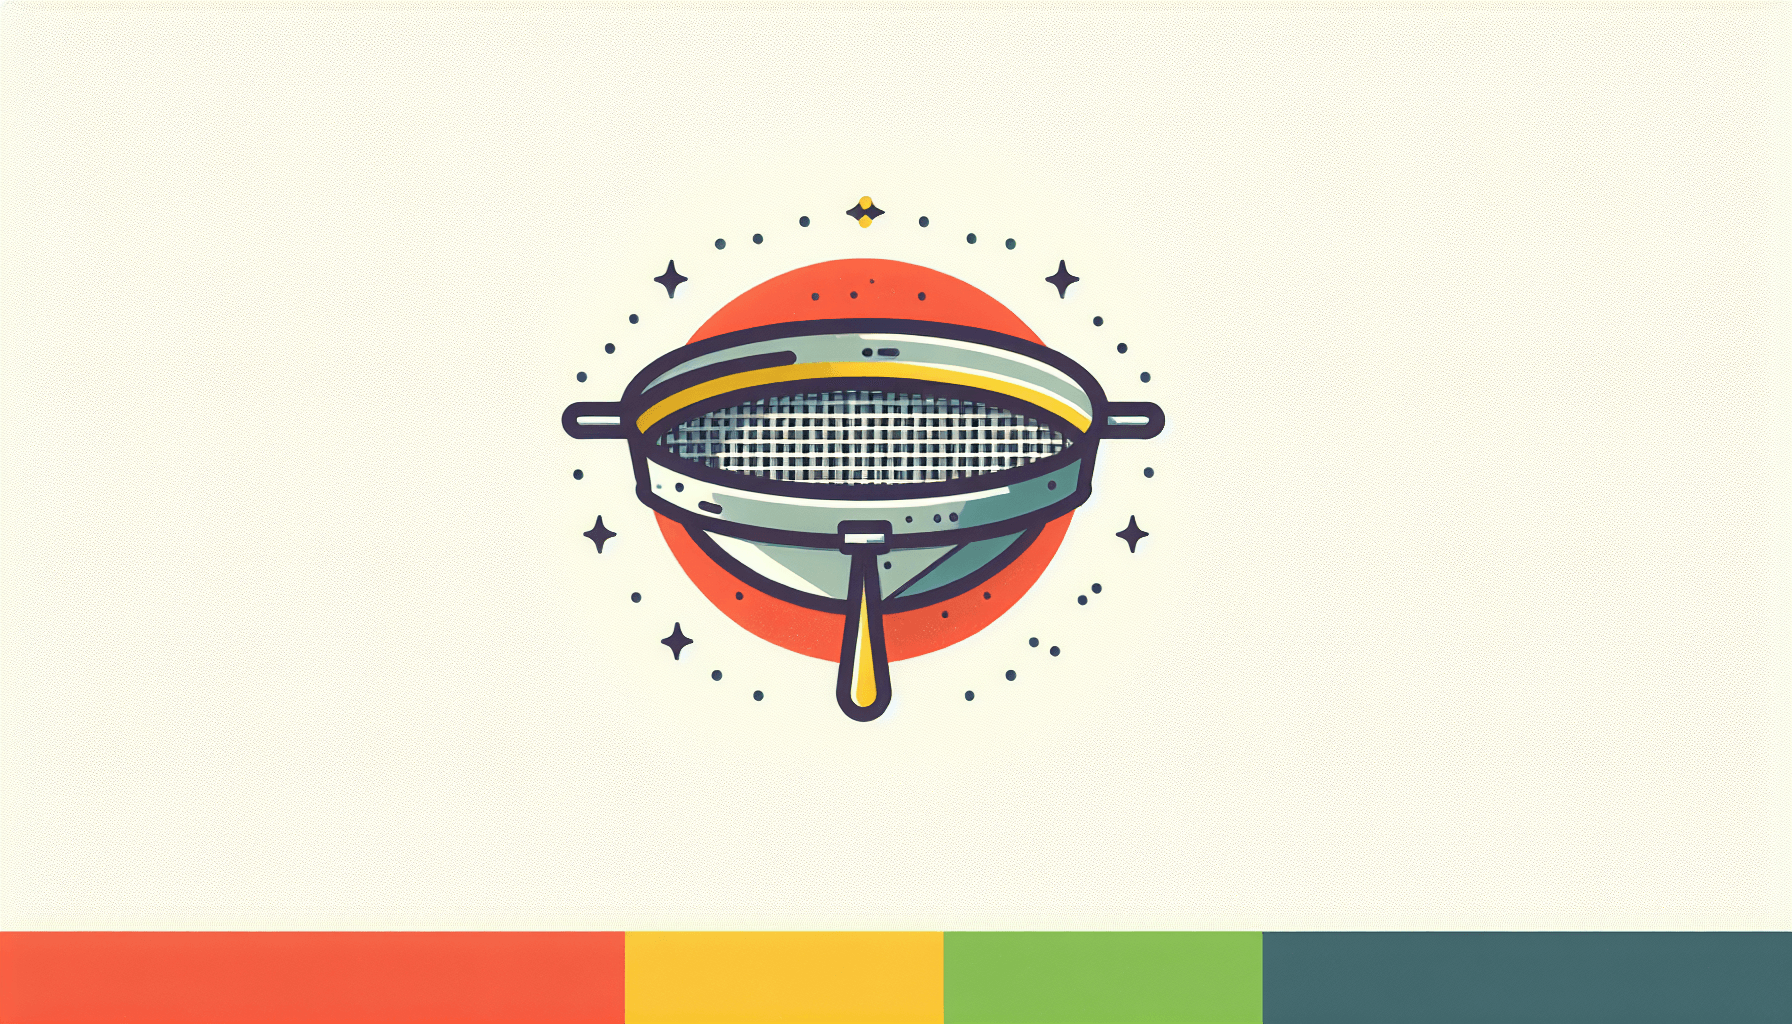 Sieve in flat illustration style and white background, red #f47574, green #88c7a8, yellow #fcc44b, and blue #645bc8 colors.